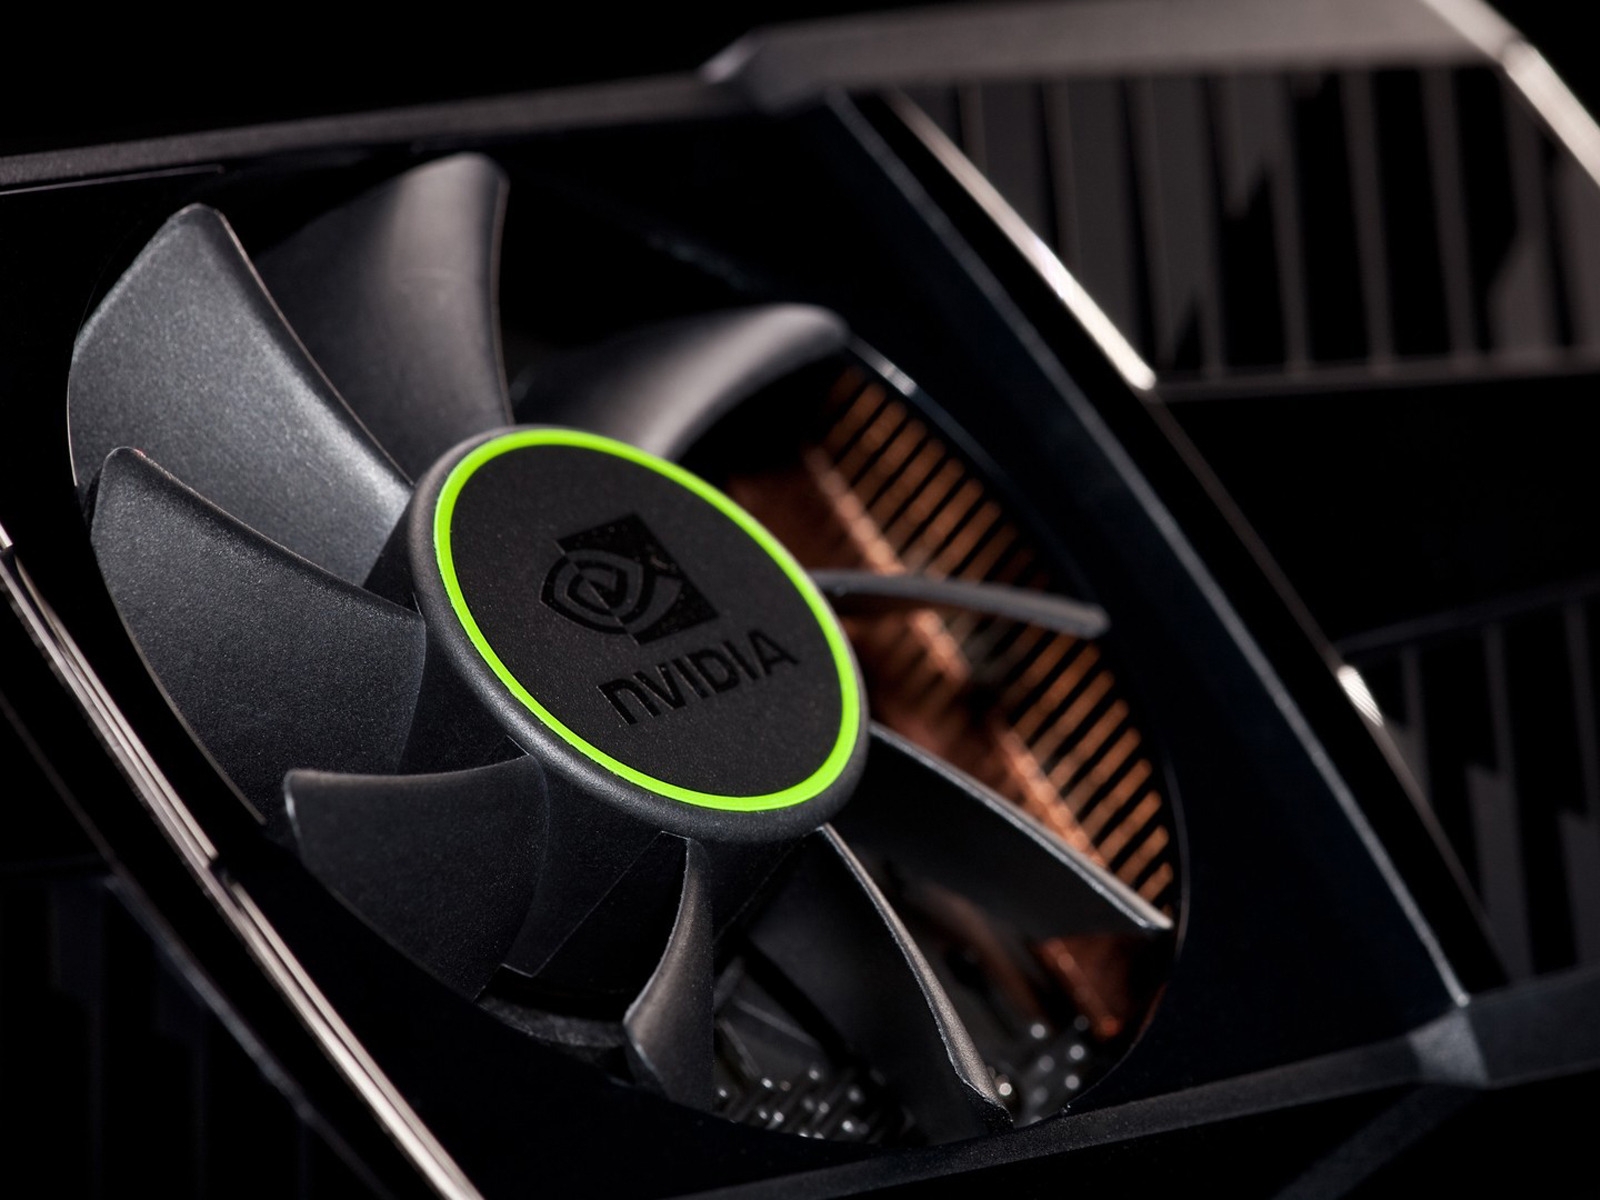 nVidia Cooler for 1600 x 1200 resolution